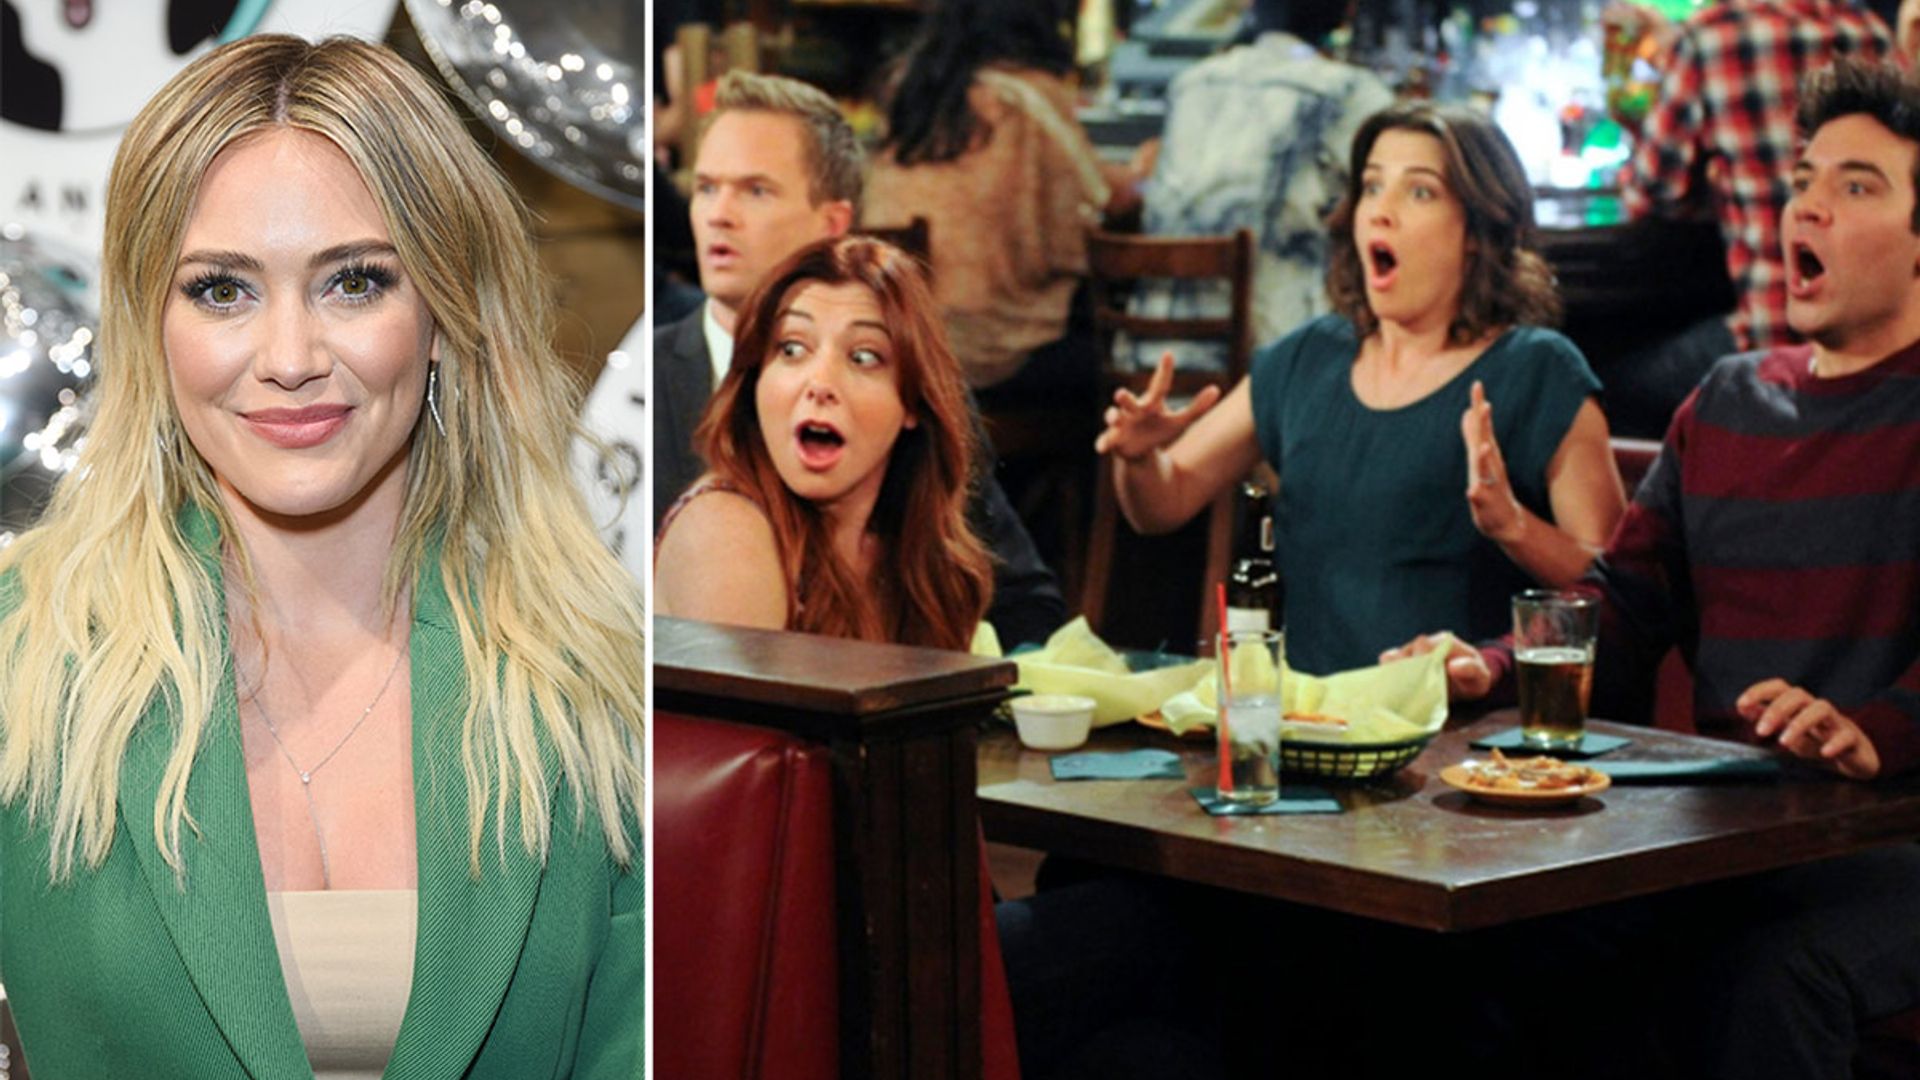 Fans aren't happy about How I Met Your Mother spin-off starring Hilary Duff